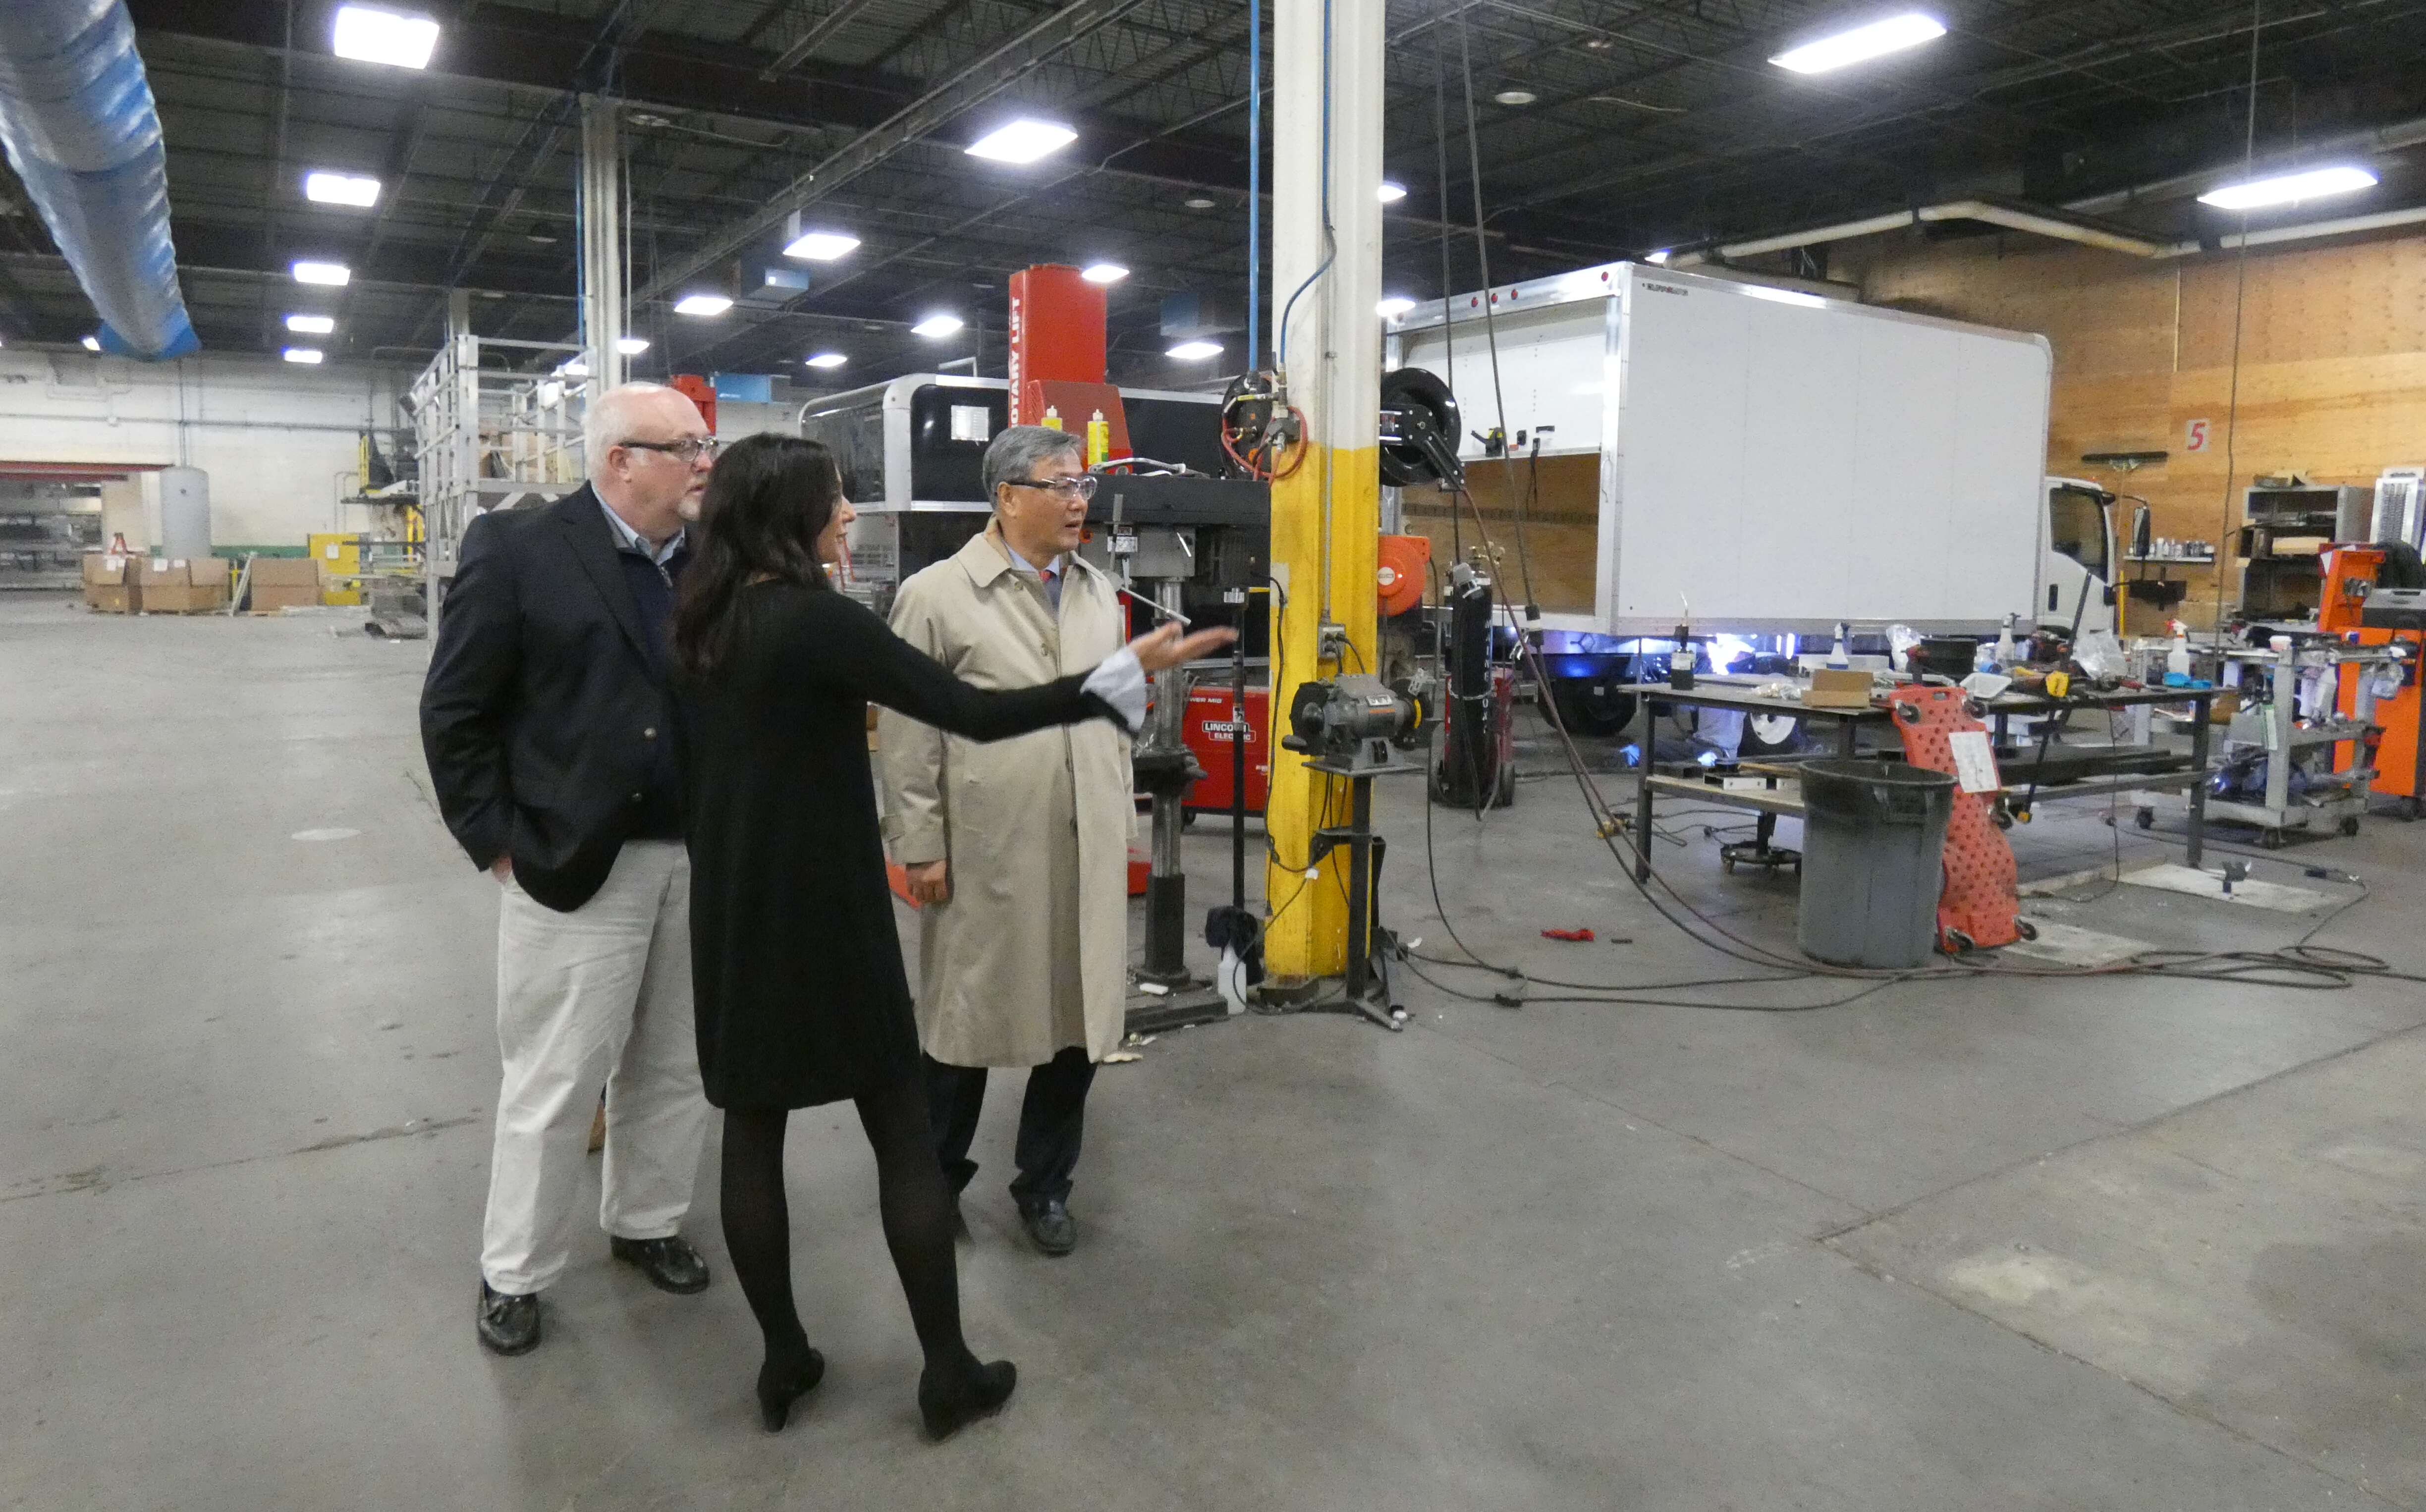 A woman and two men in discussion on the floor of a large manufacturing plant.